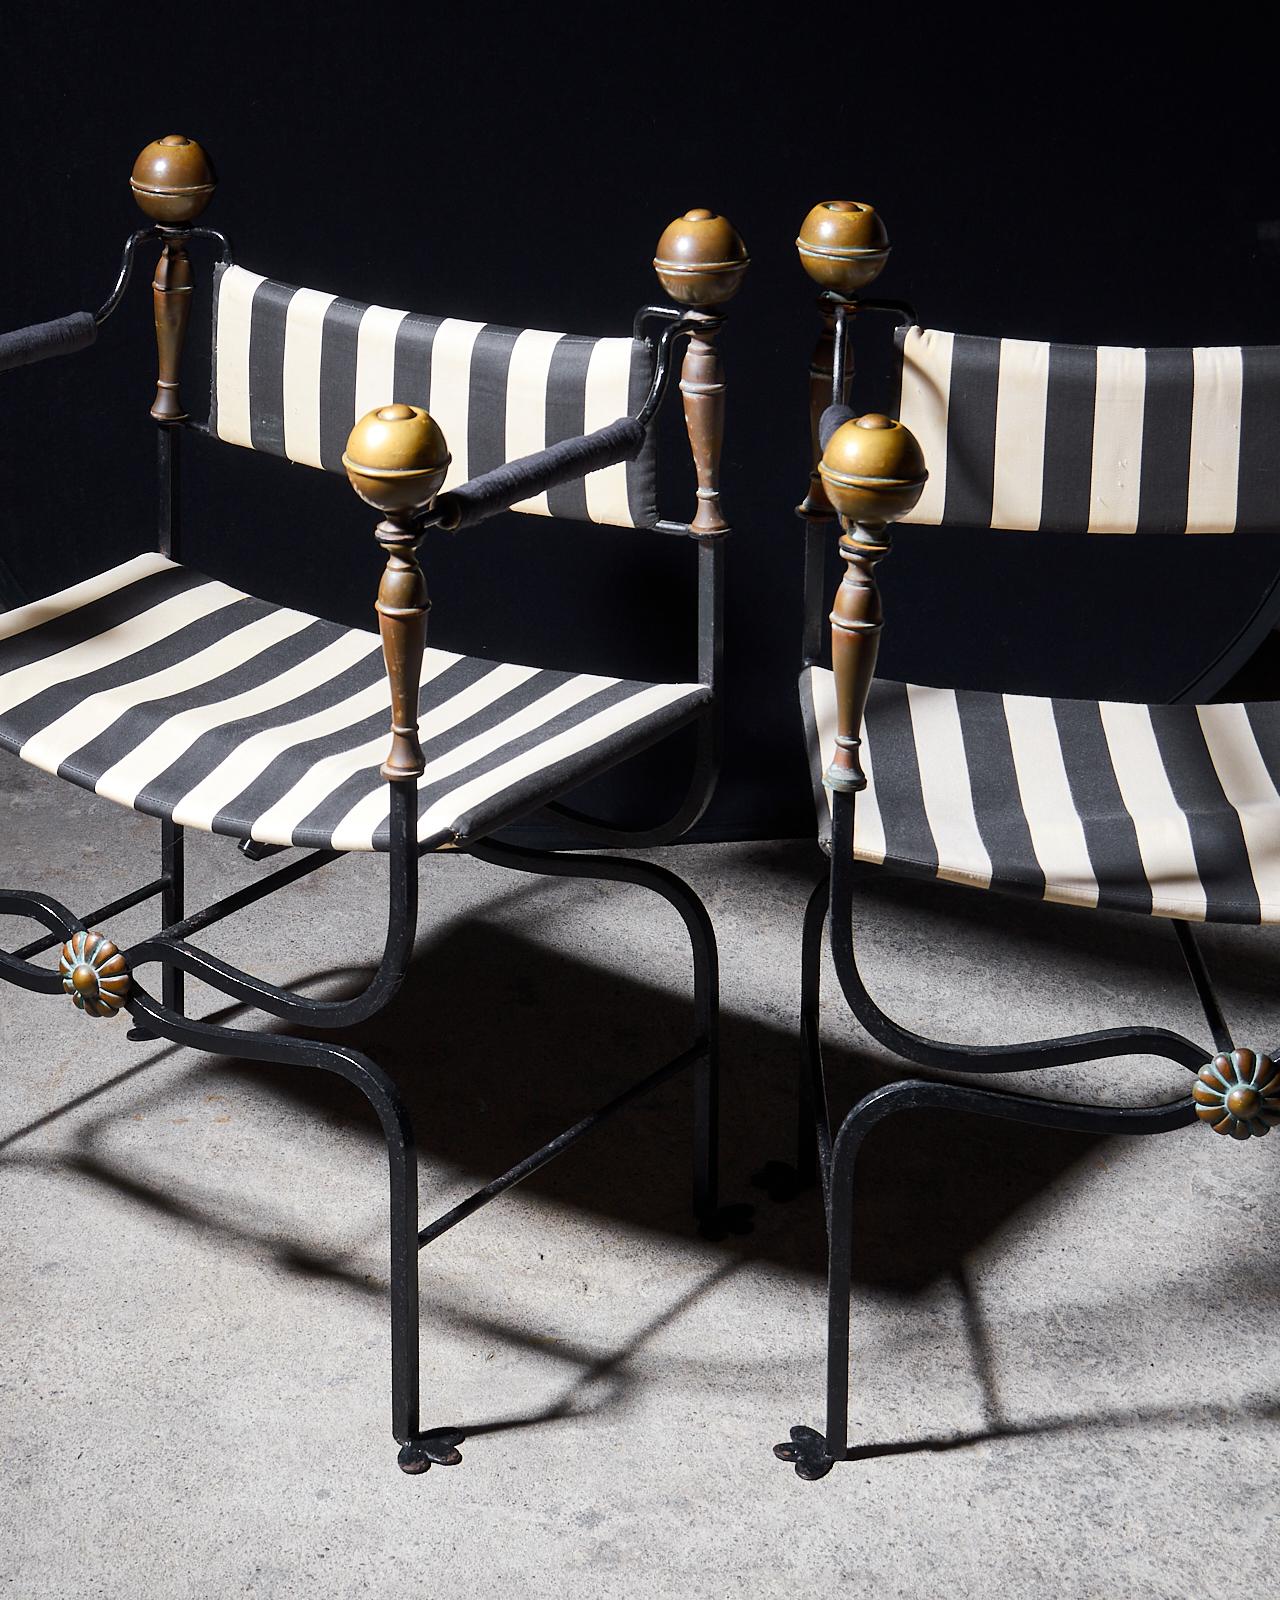 Stunning set of four Italian Savonarola armchairs or Dante chairs hand-crafted from iron. The frames are made in a campaign style featuring curule legs that end with whimsical bird feet and bronze mounts with large patinated brass finials.